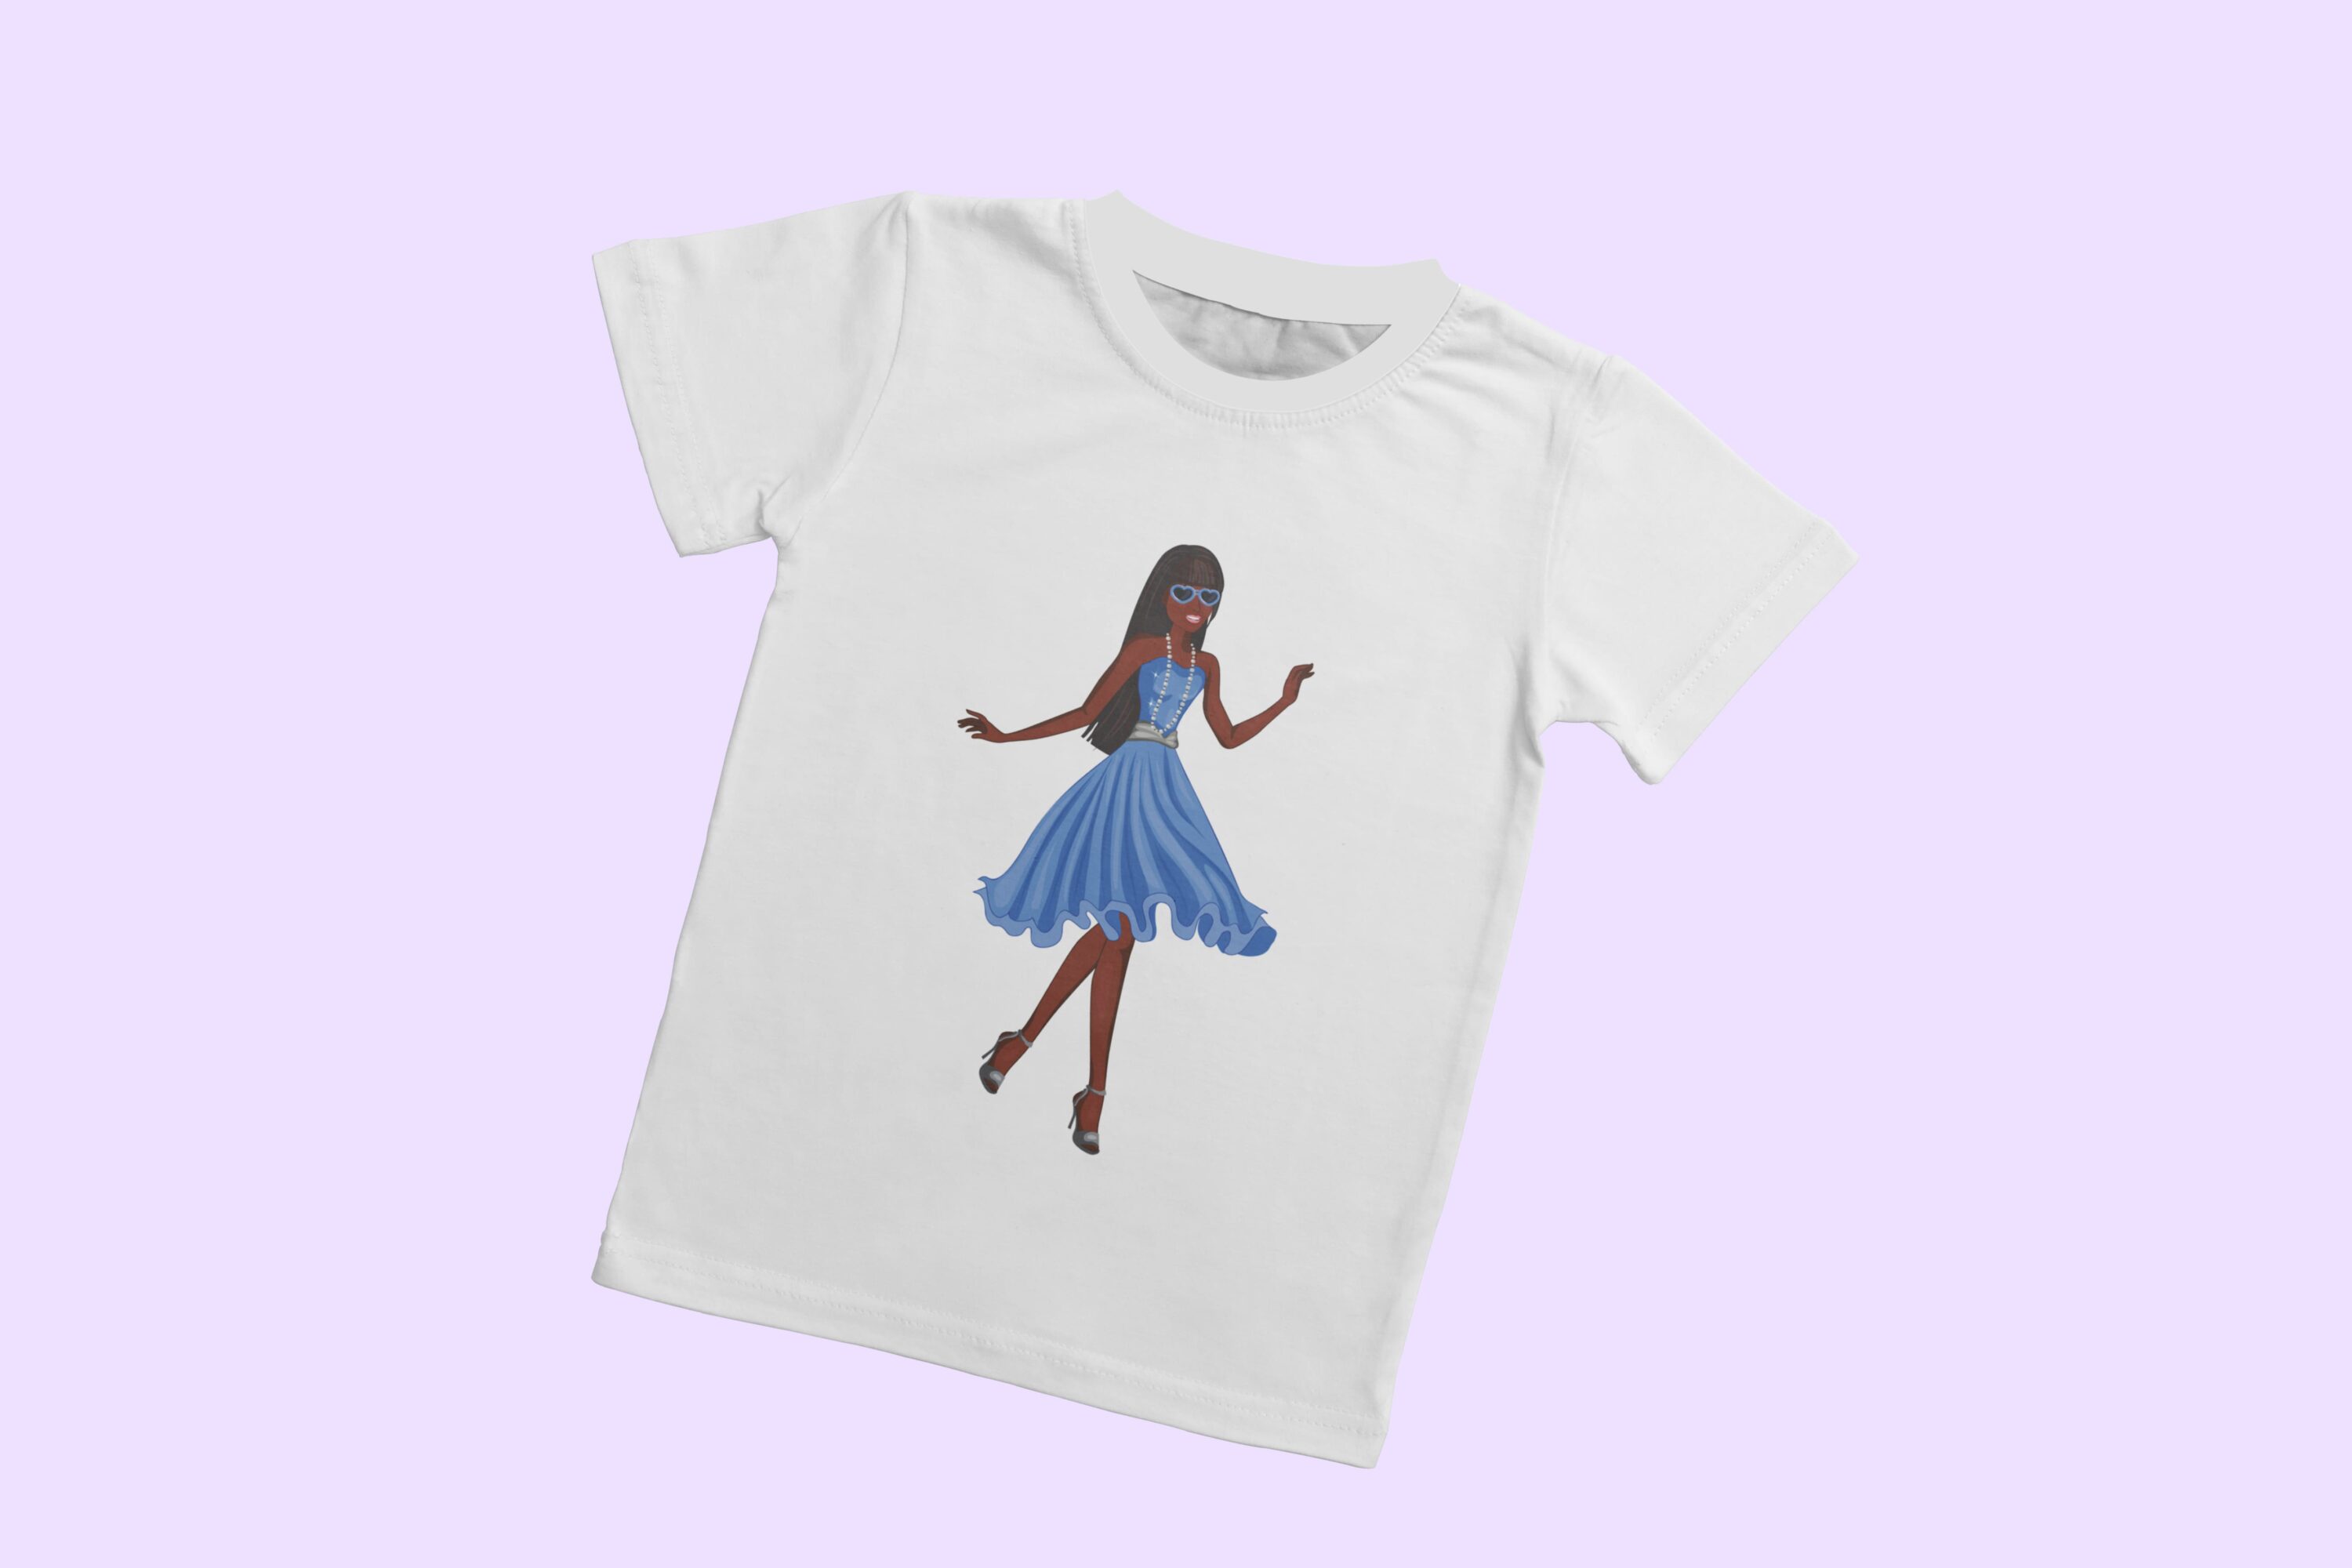 A girl in a blue dress with a print on a white T-shirt.